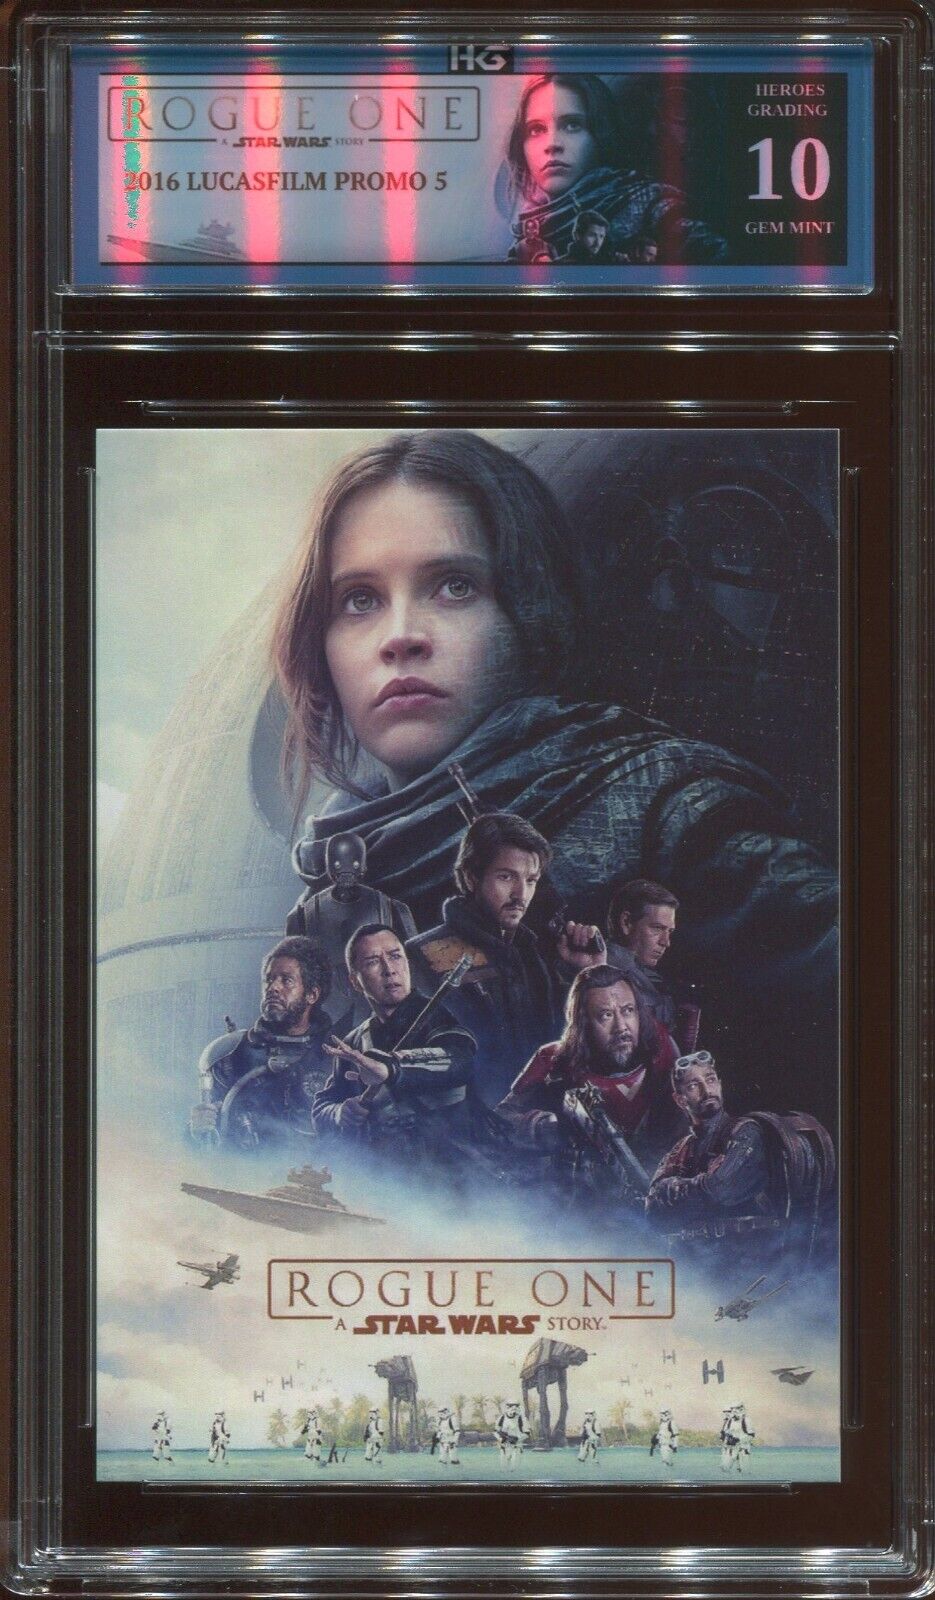 2016 ROGUE ONE: A STAR WARS STORY PROMO 5 HG GEM MINT 10 HEROES GRADING